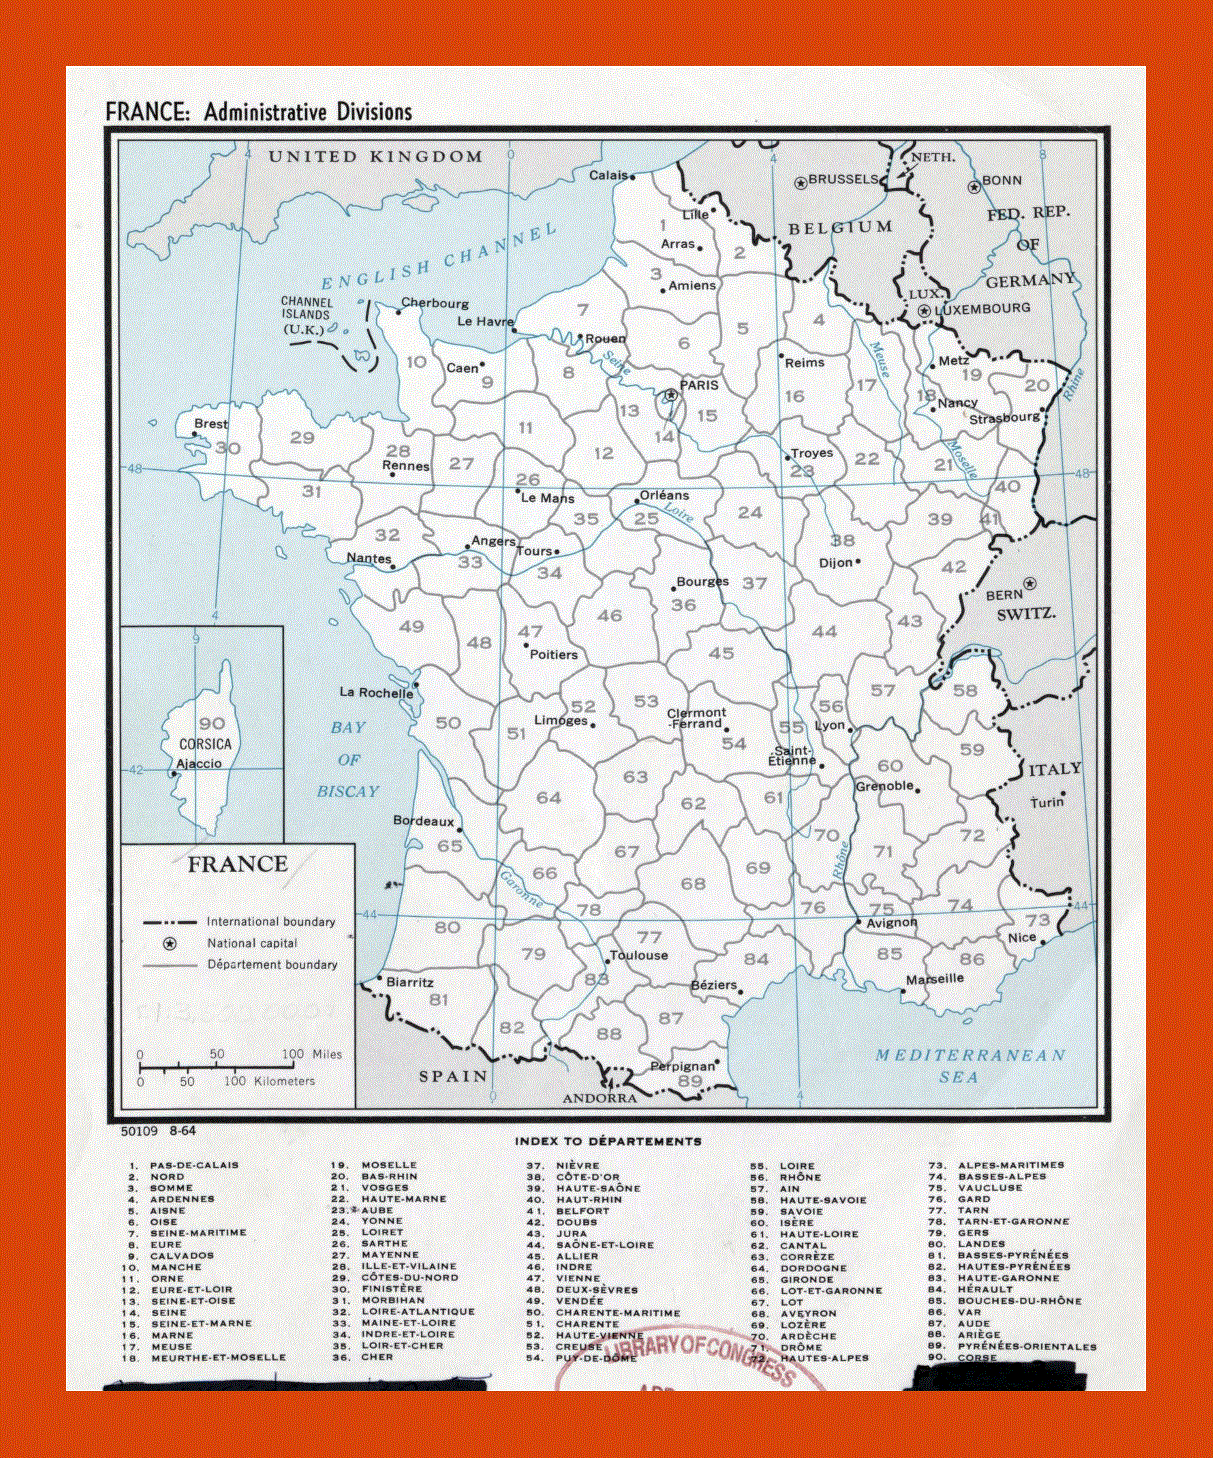 Administrative divisions map of France - 1964